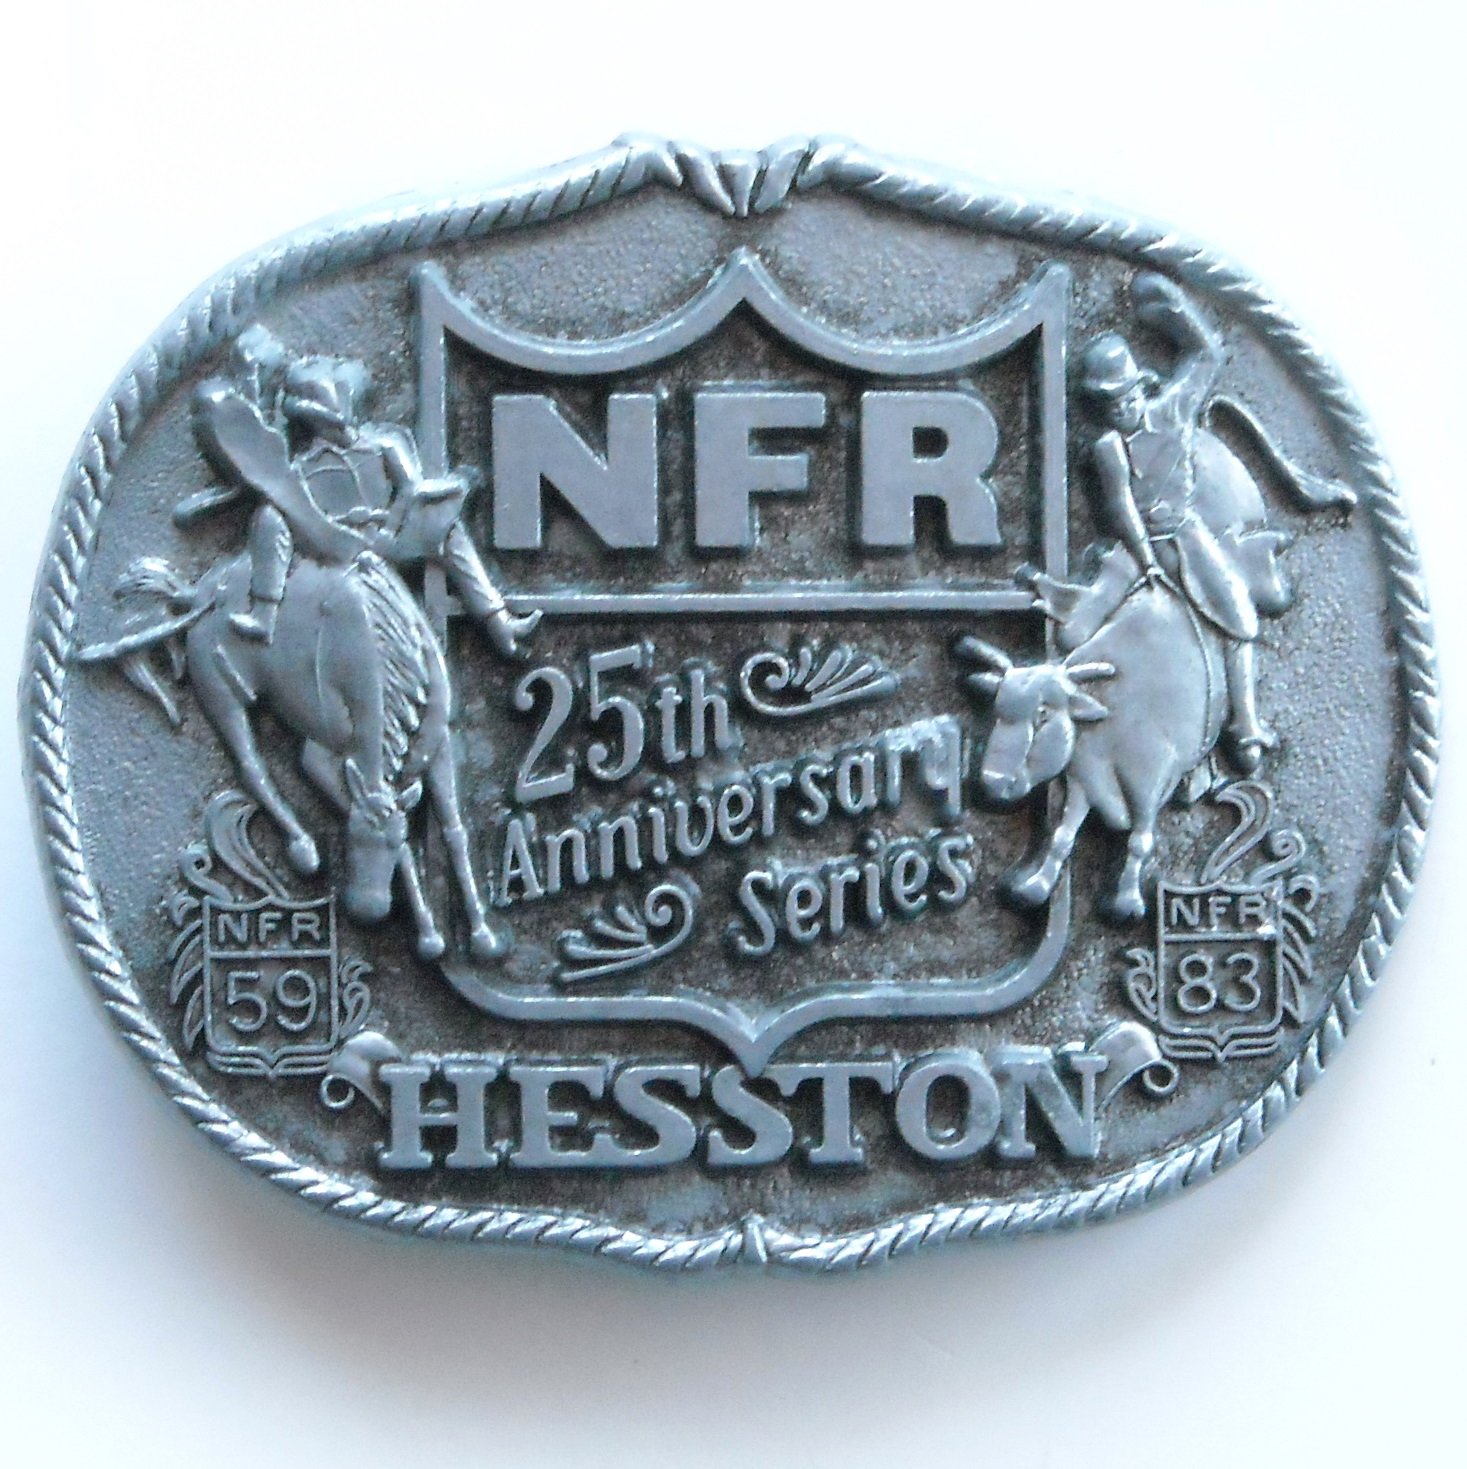 1983 National Finals Rodeo Hesston NFR 25th Anniversary Series Belt Buckle 